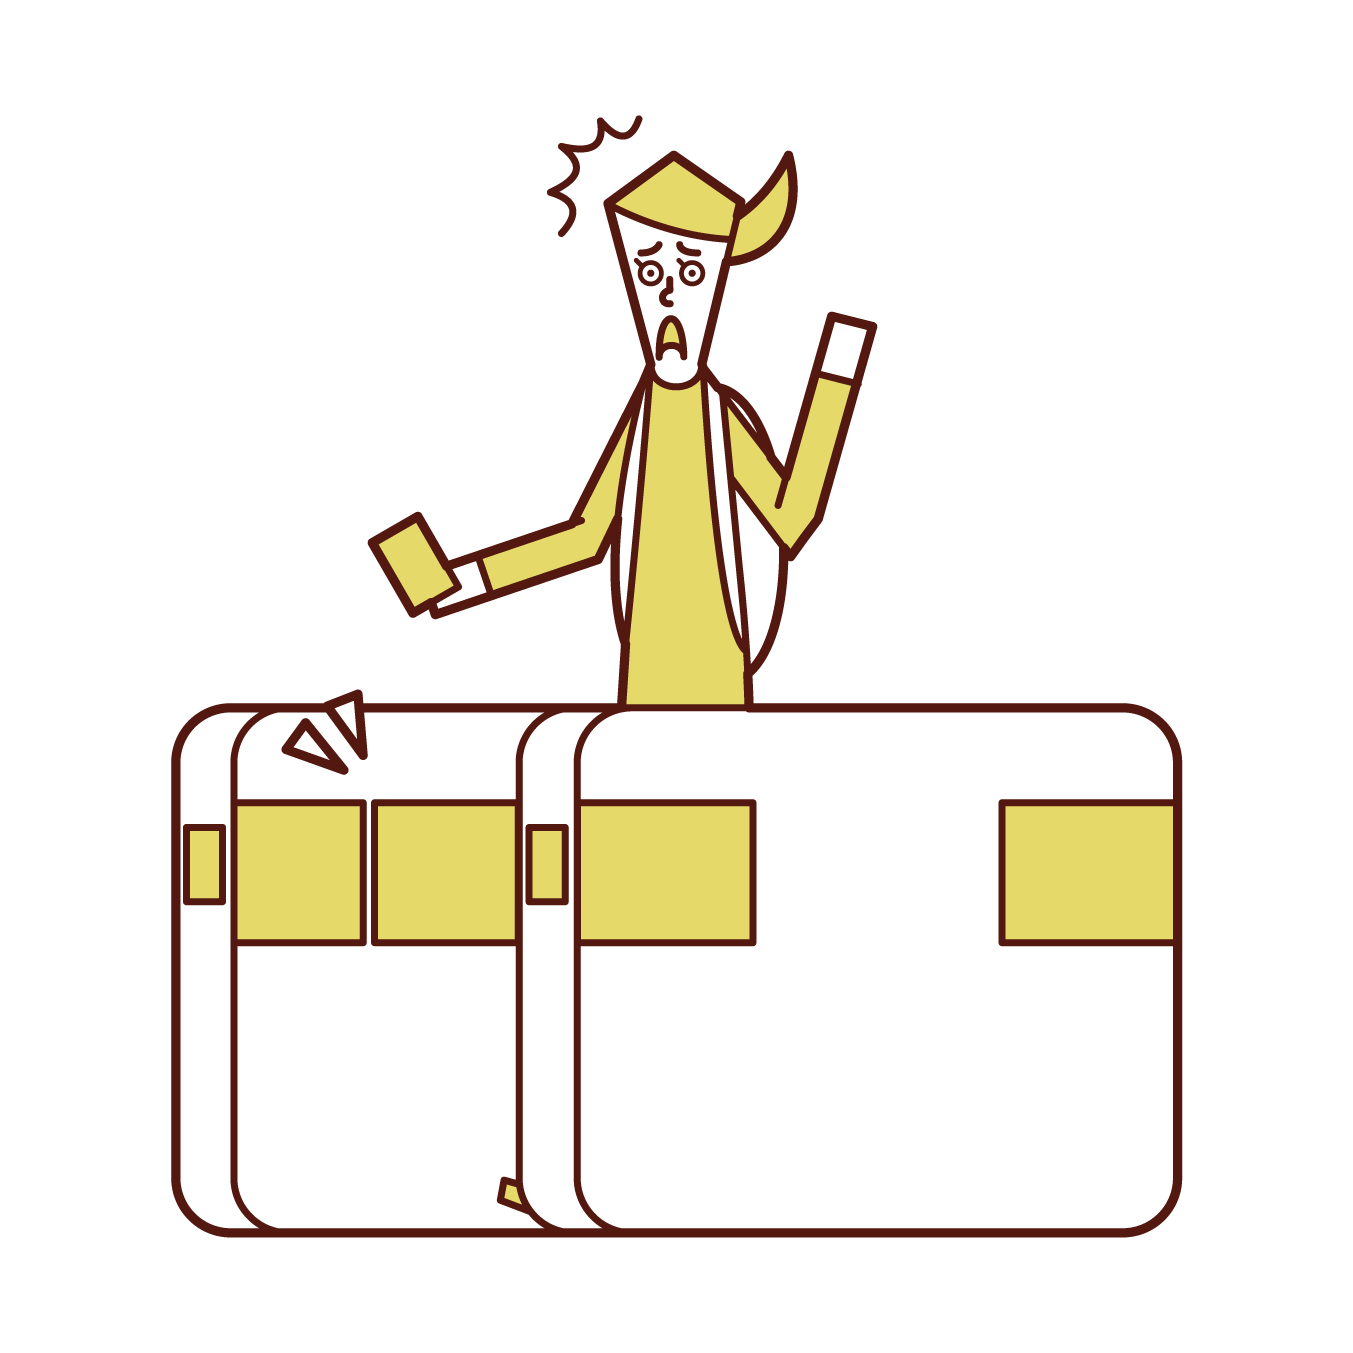 Illustration of a woman who couldn't pass through the ticket gate